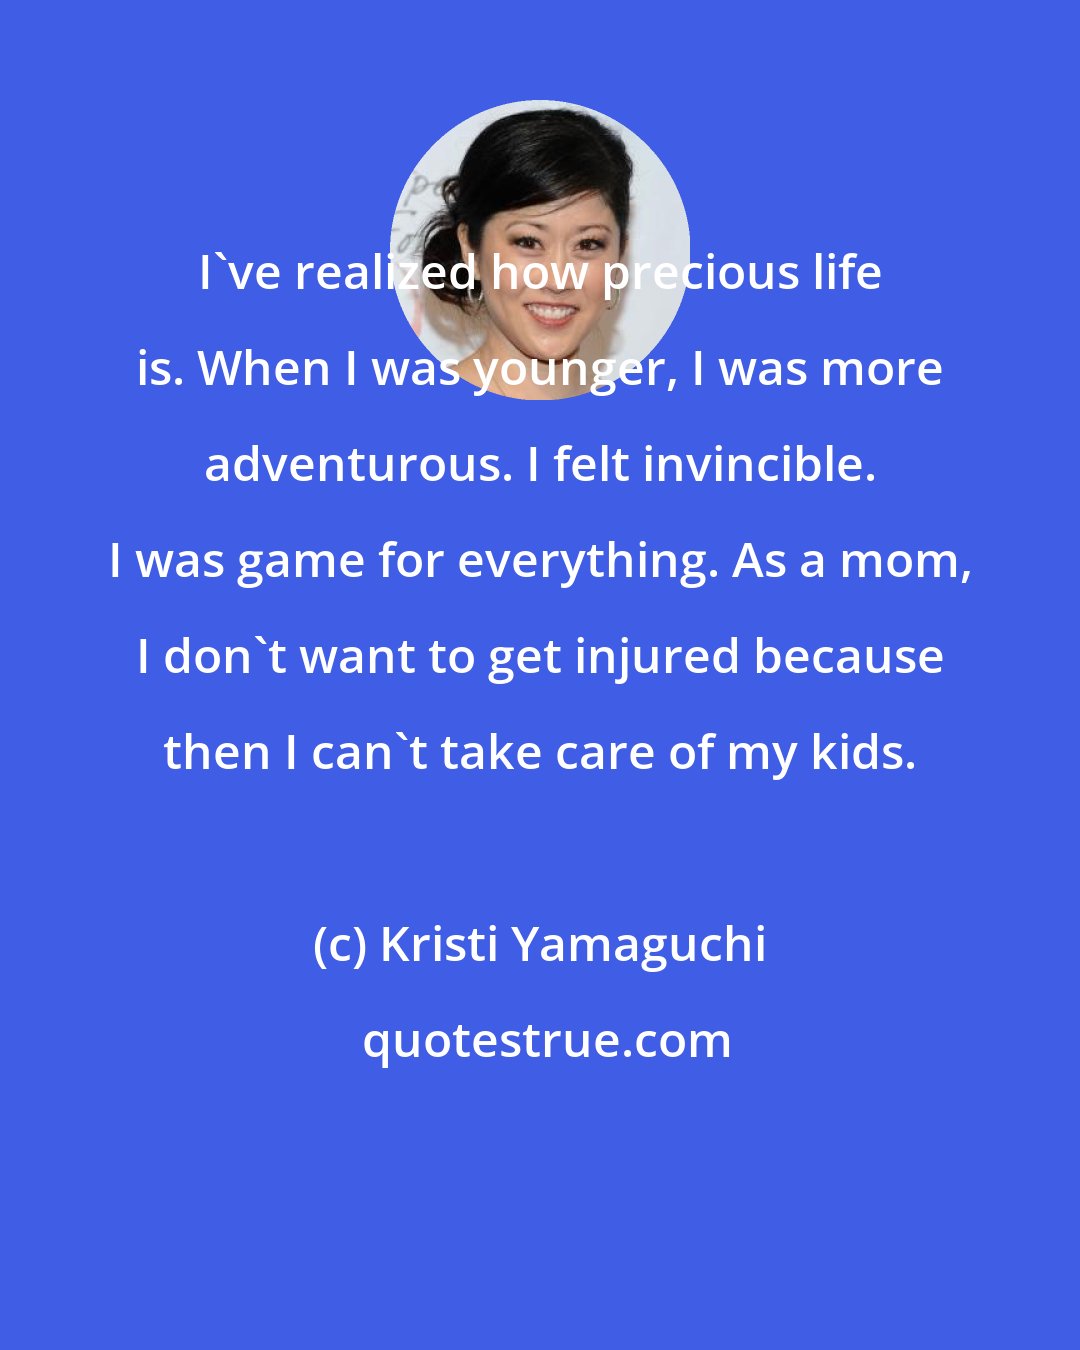 Kristi Yamaguchi: I've realized how precious life is. When I was younger, I was more adventurous. I felt invincible. I was game for everything. As a mom, I don't want to get injured because then I can't take care of my kids.